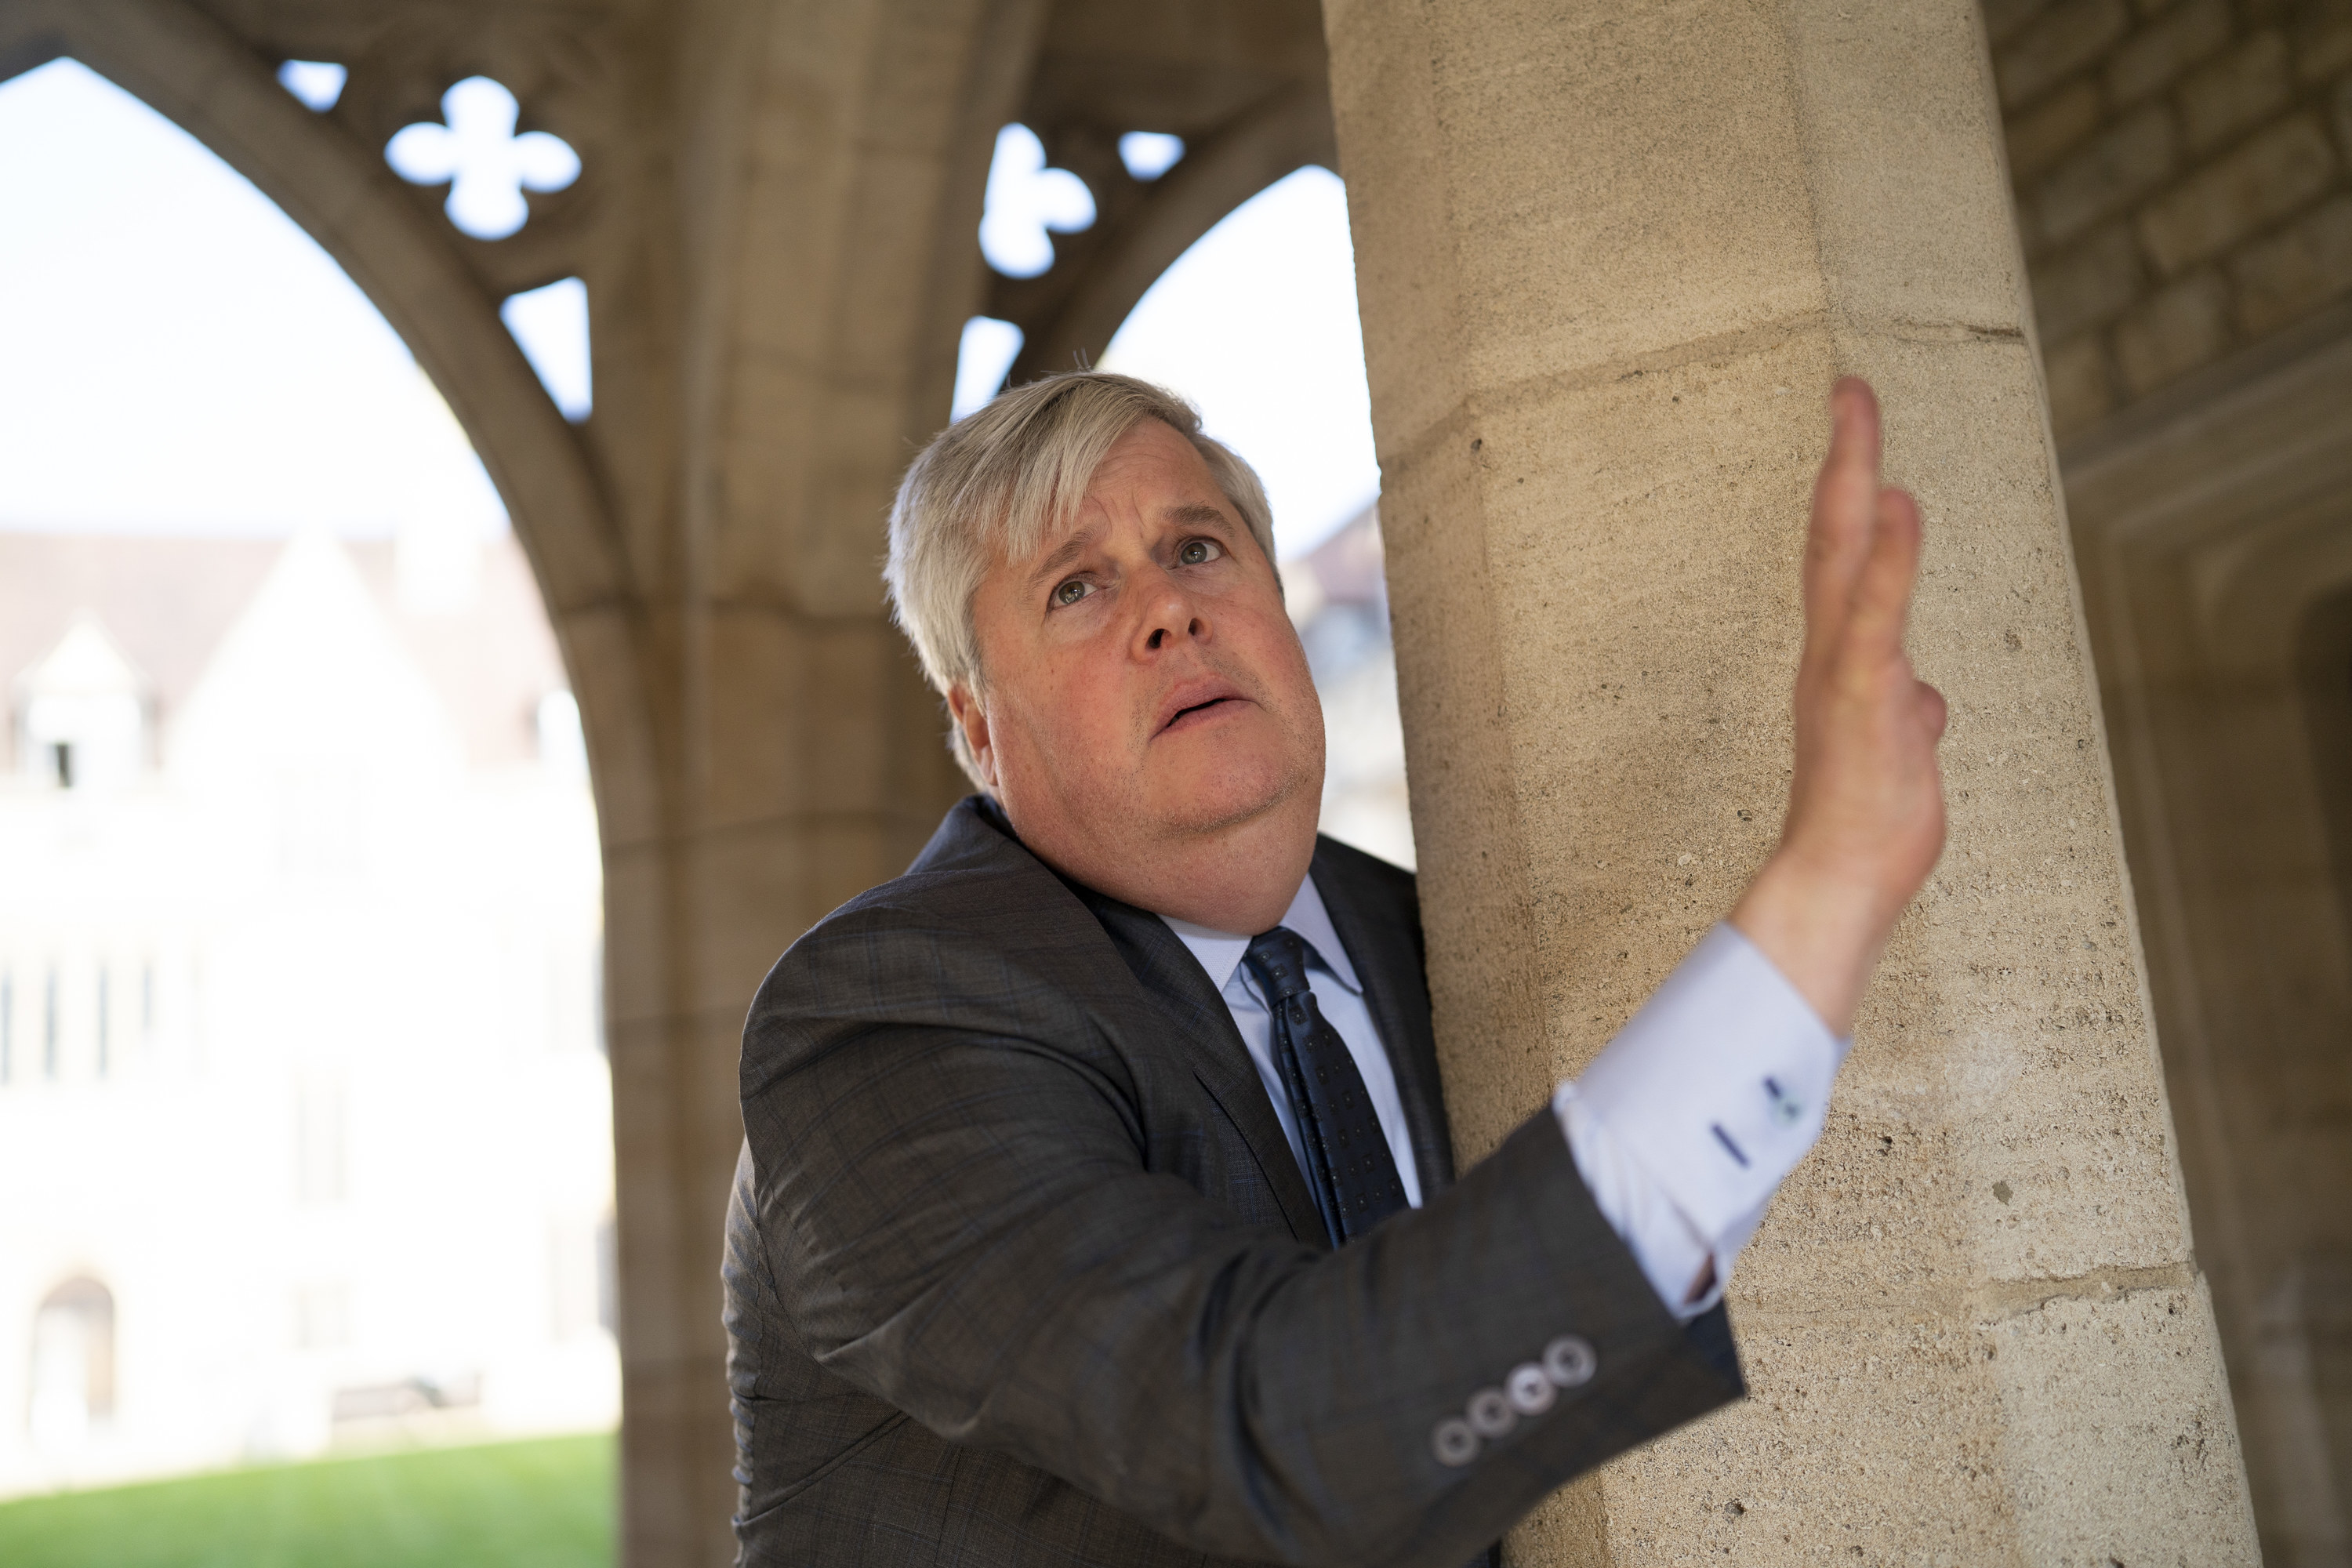 Lemony Snicket author Daniel Handler acting silly at Oxford University